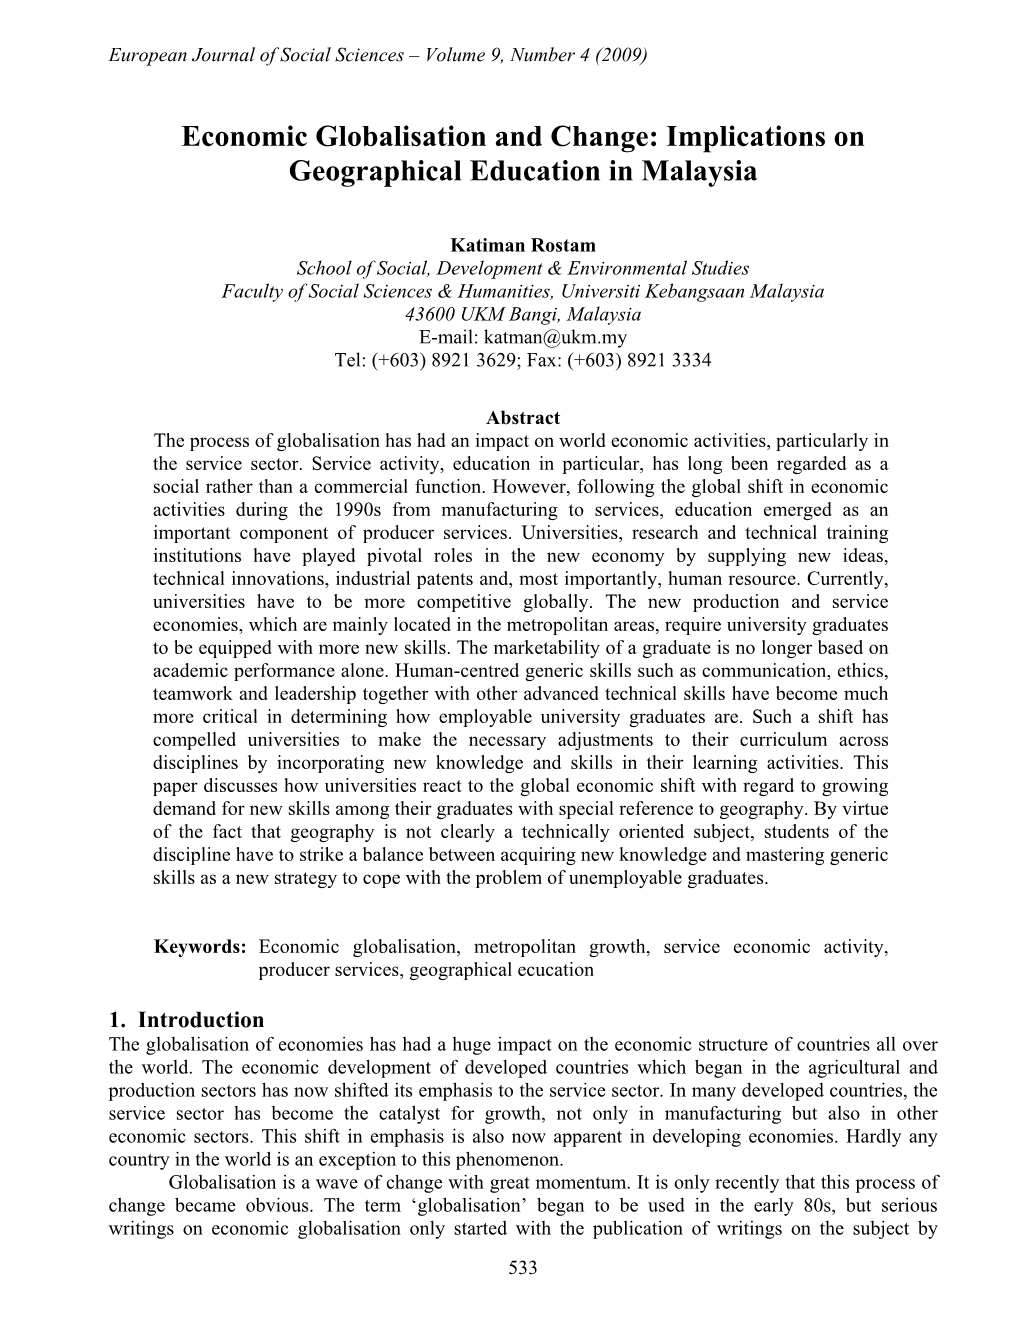 Economic Globalisation and Change: Implications on Geographical Education in Malaysia